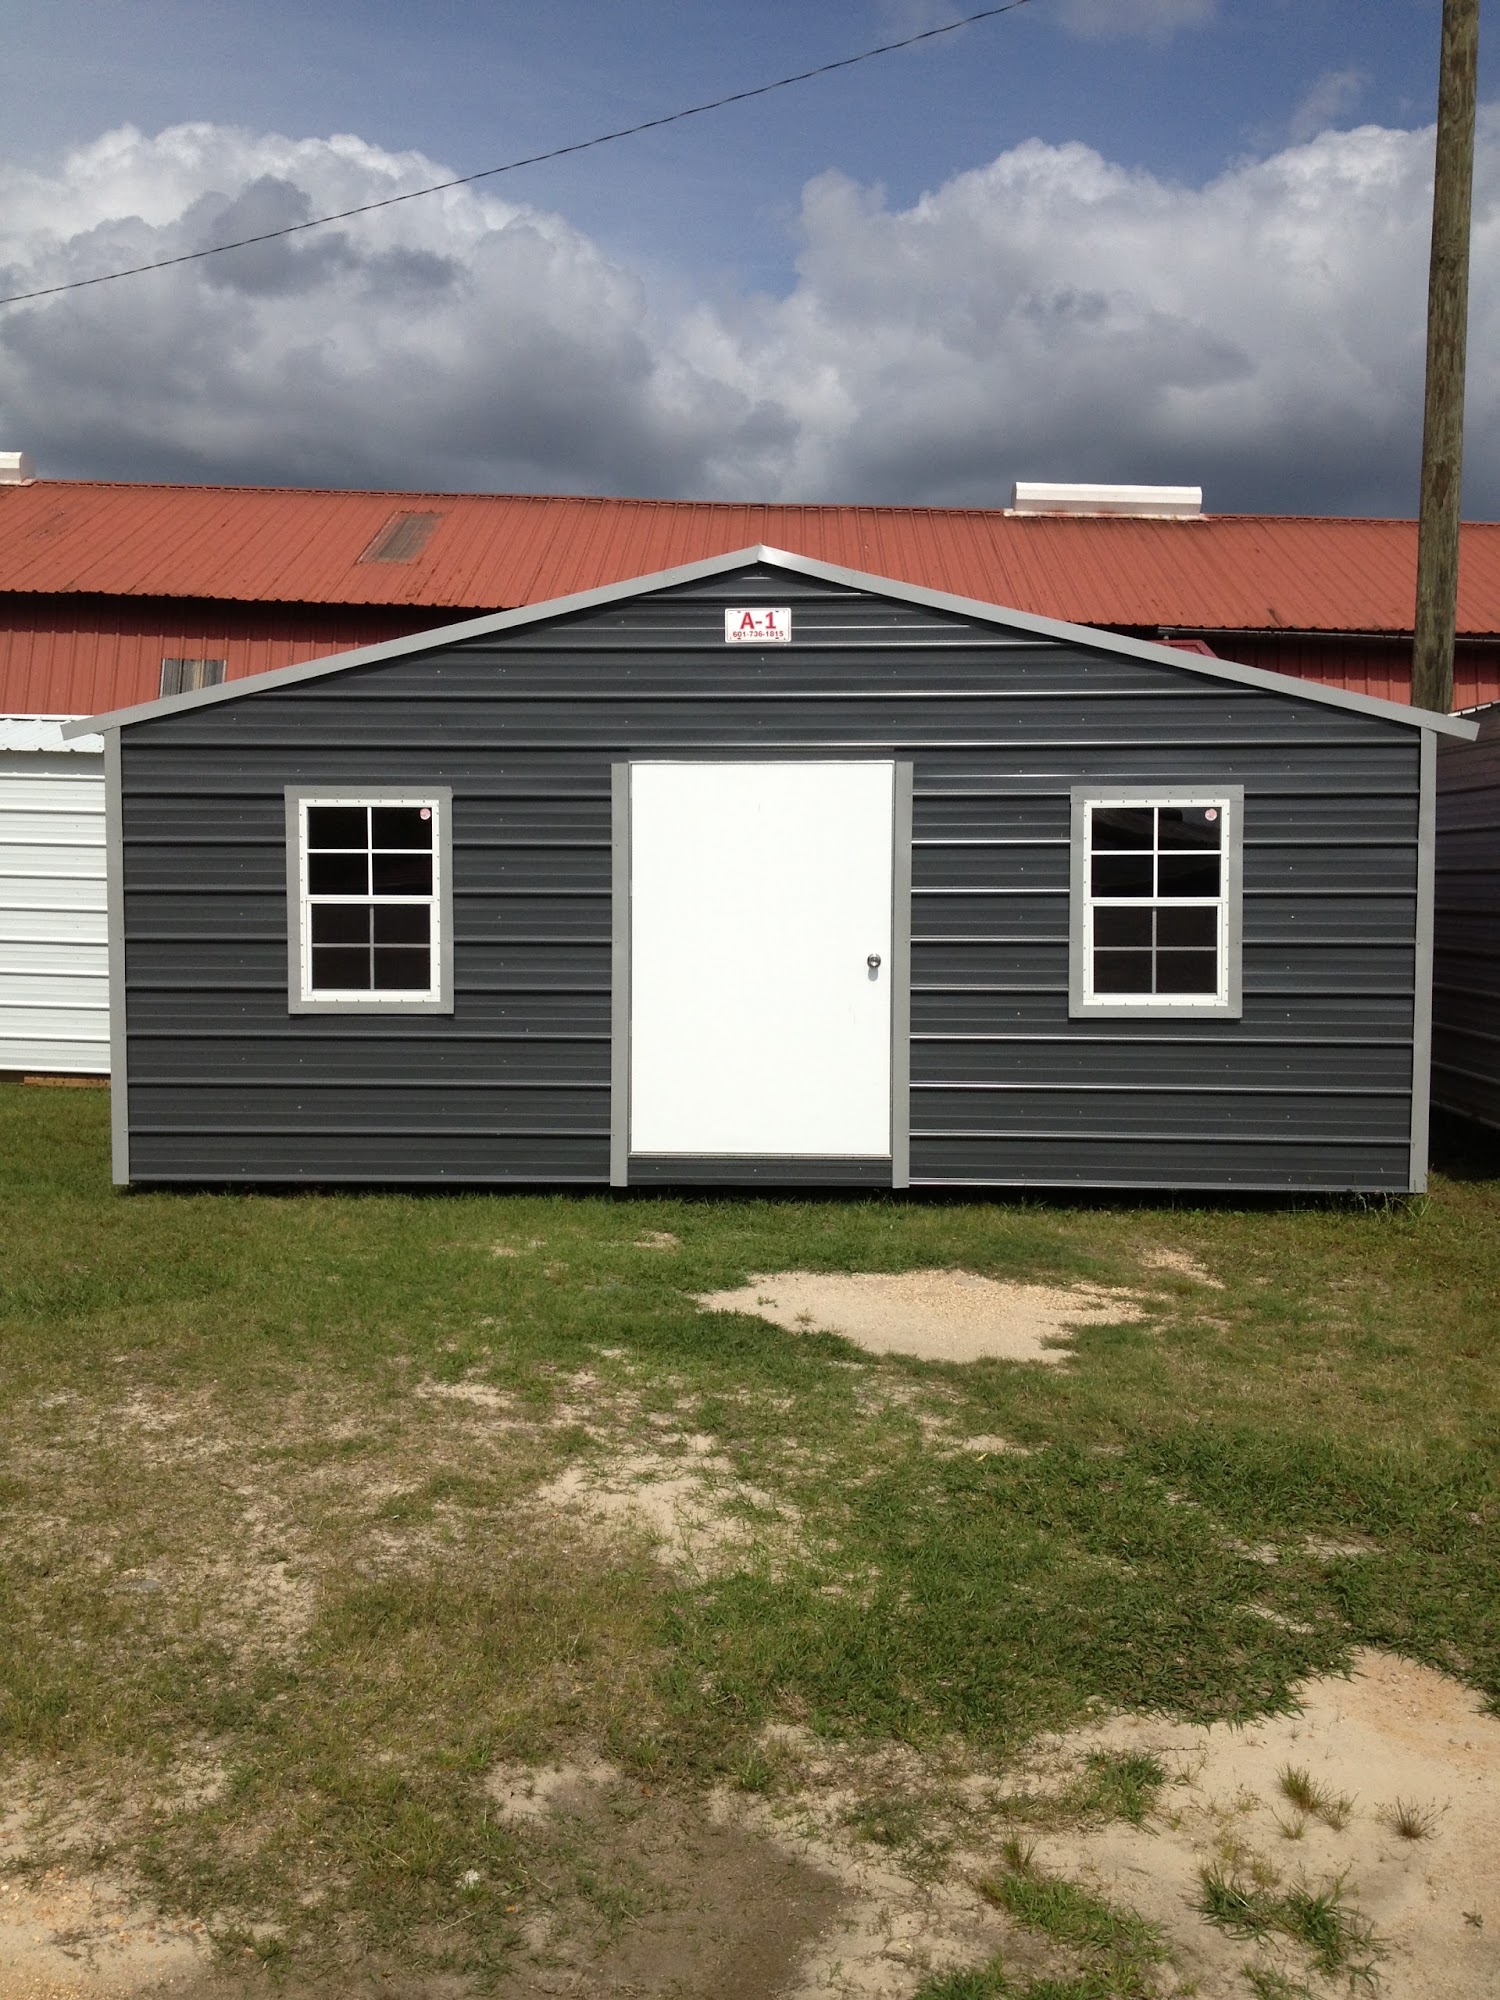 A-1 Portable Buildings 495 Old Highway 98 East, Columbia Mississippi 39429